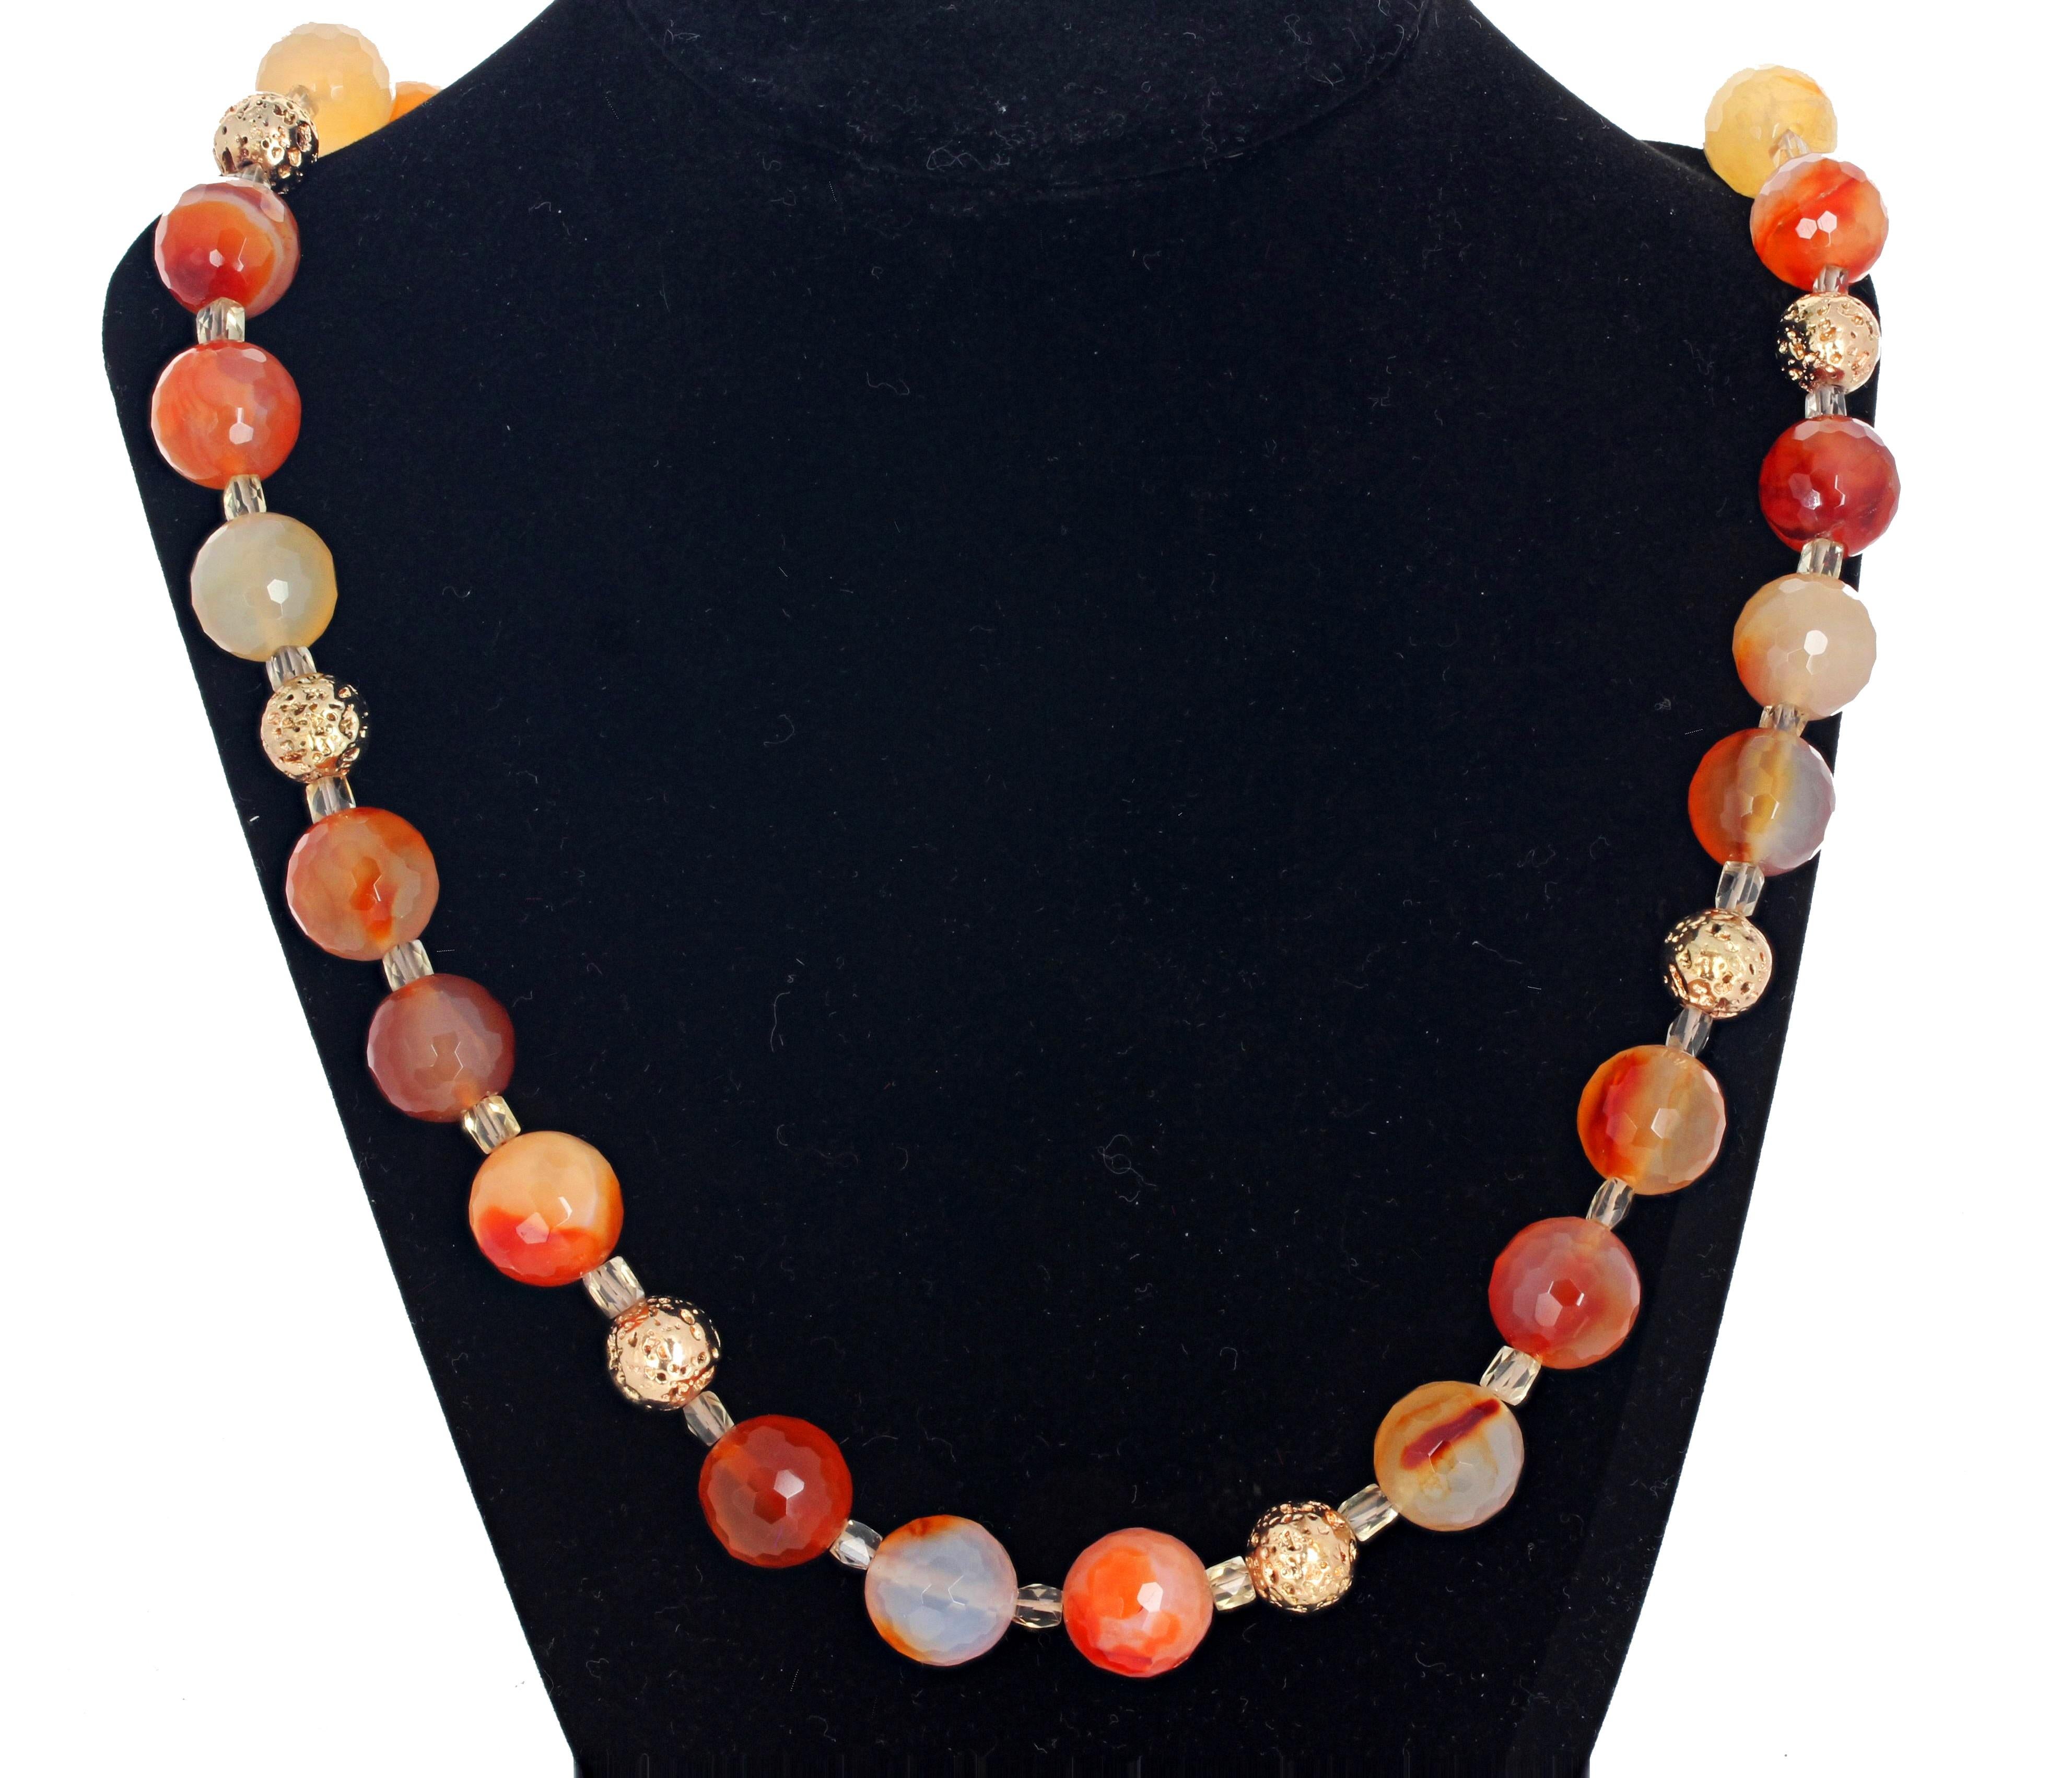 These glittering checkerboard gem cut natural 14mm round natural Fire Agates are enhanced with brilliant gem cut clear citrines and goldy round beautiful Lava Rock.  This elegant necklace is 23 1/2 inches long with a gold plated easy-to-use hook